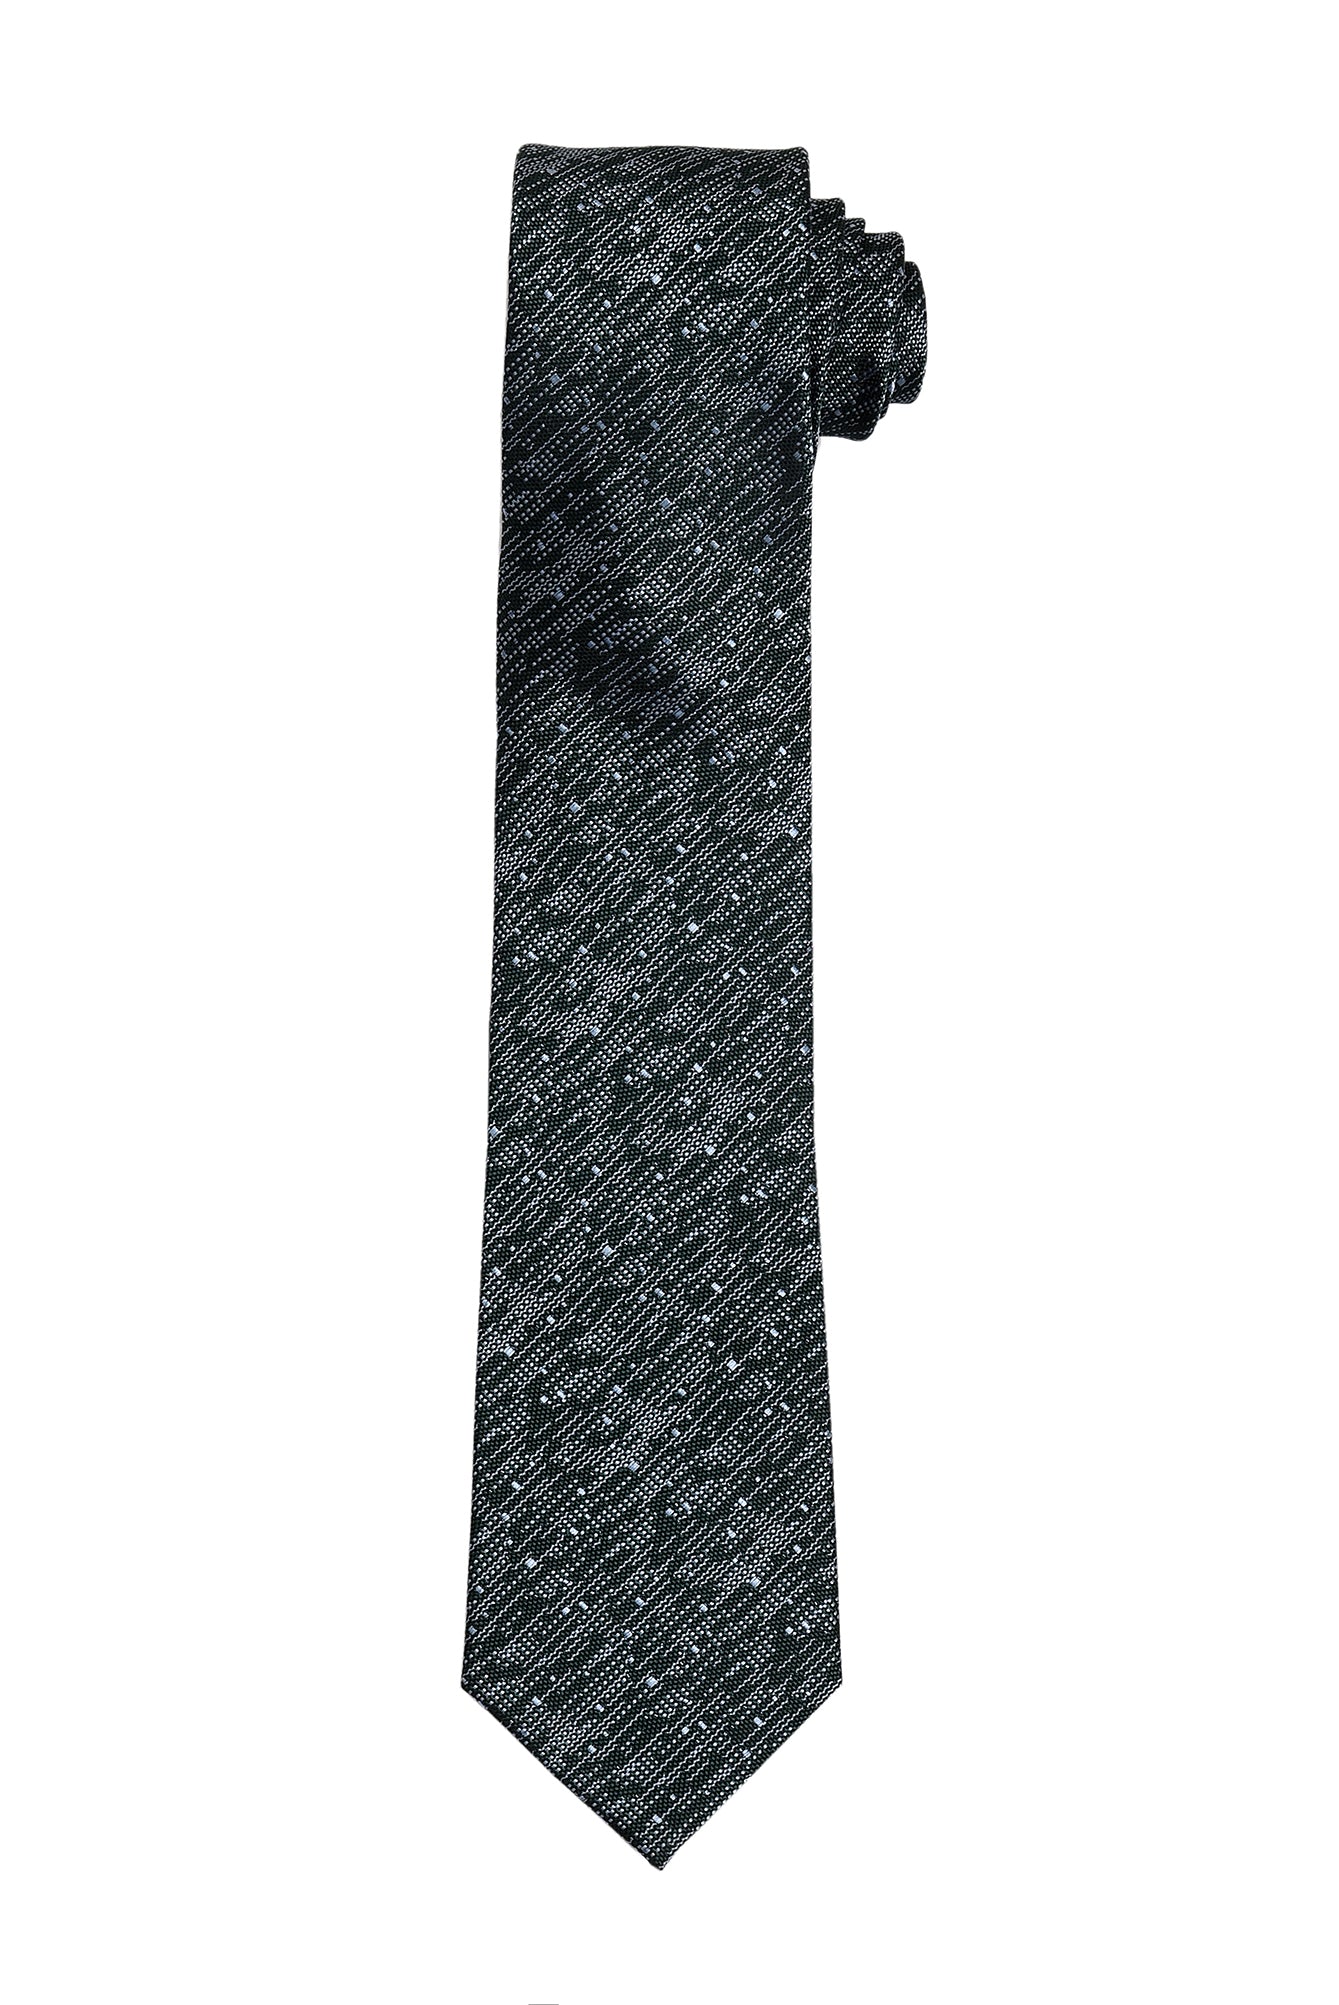 AST3185 POLYESTER WOVEN TIE